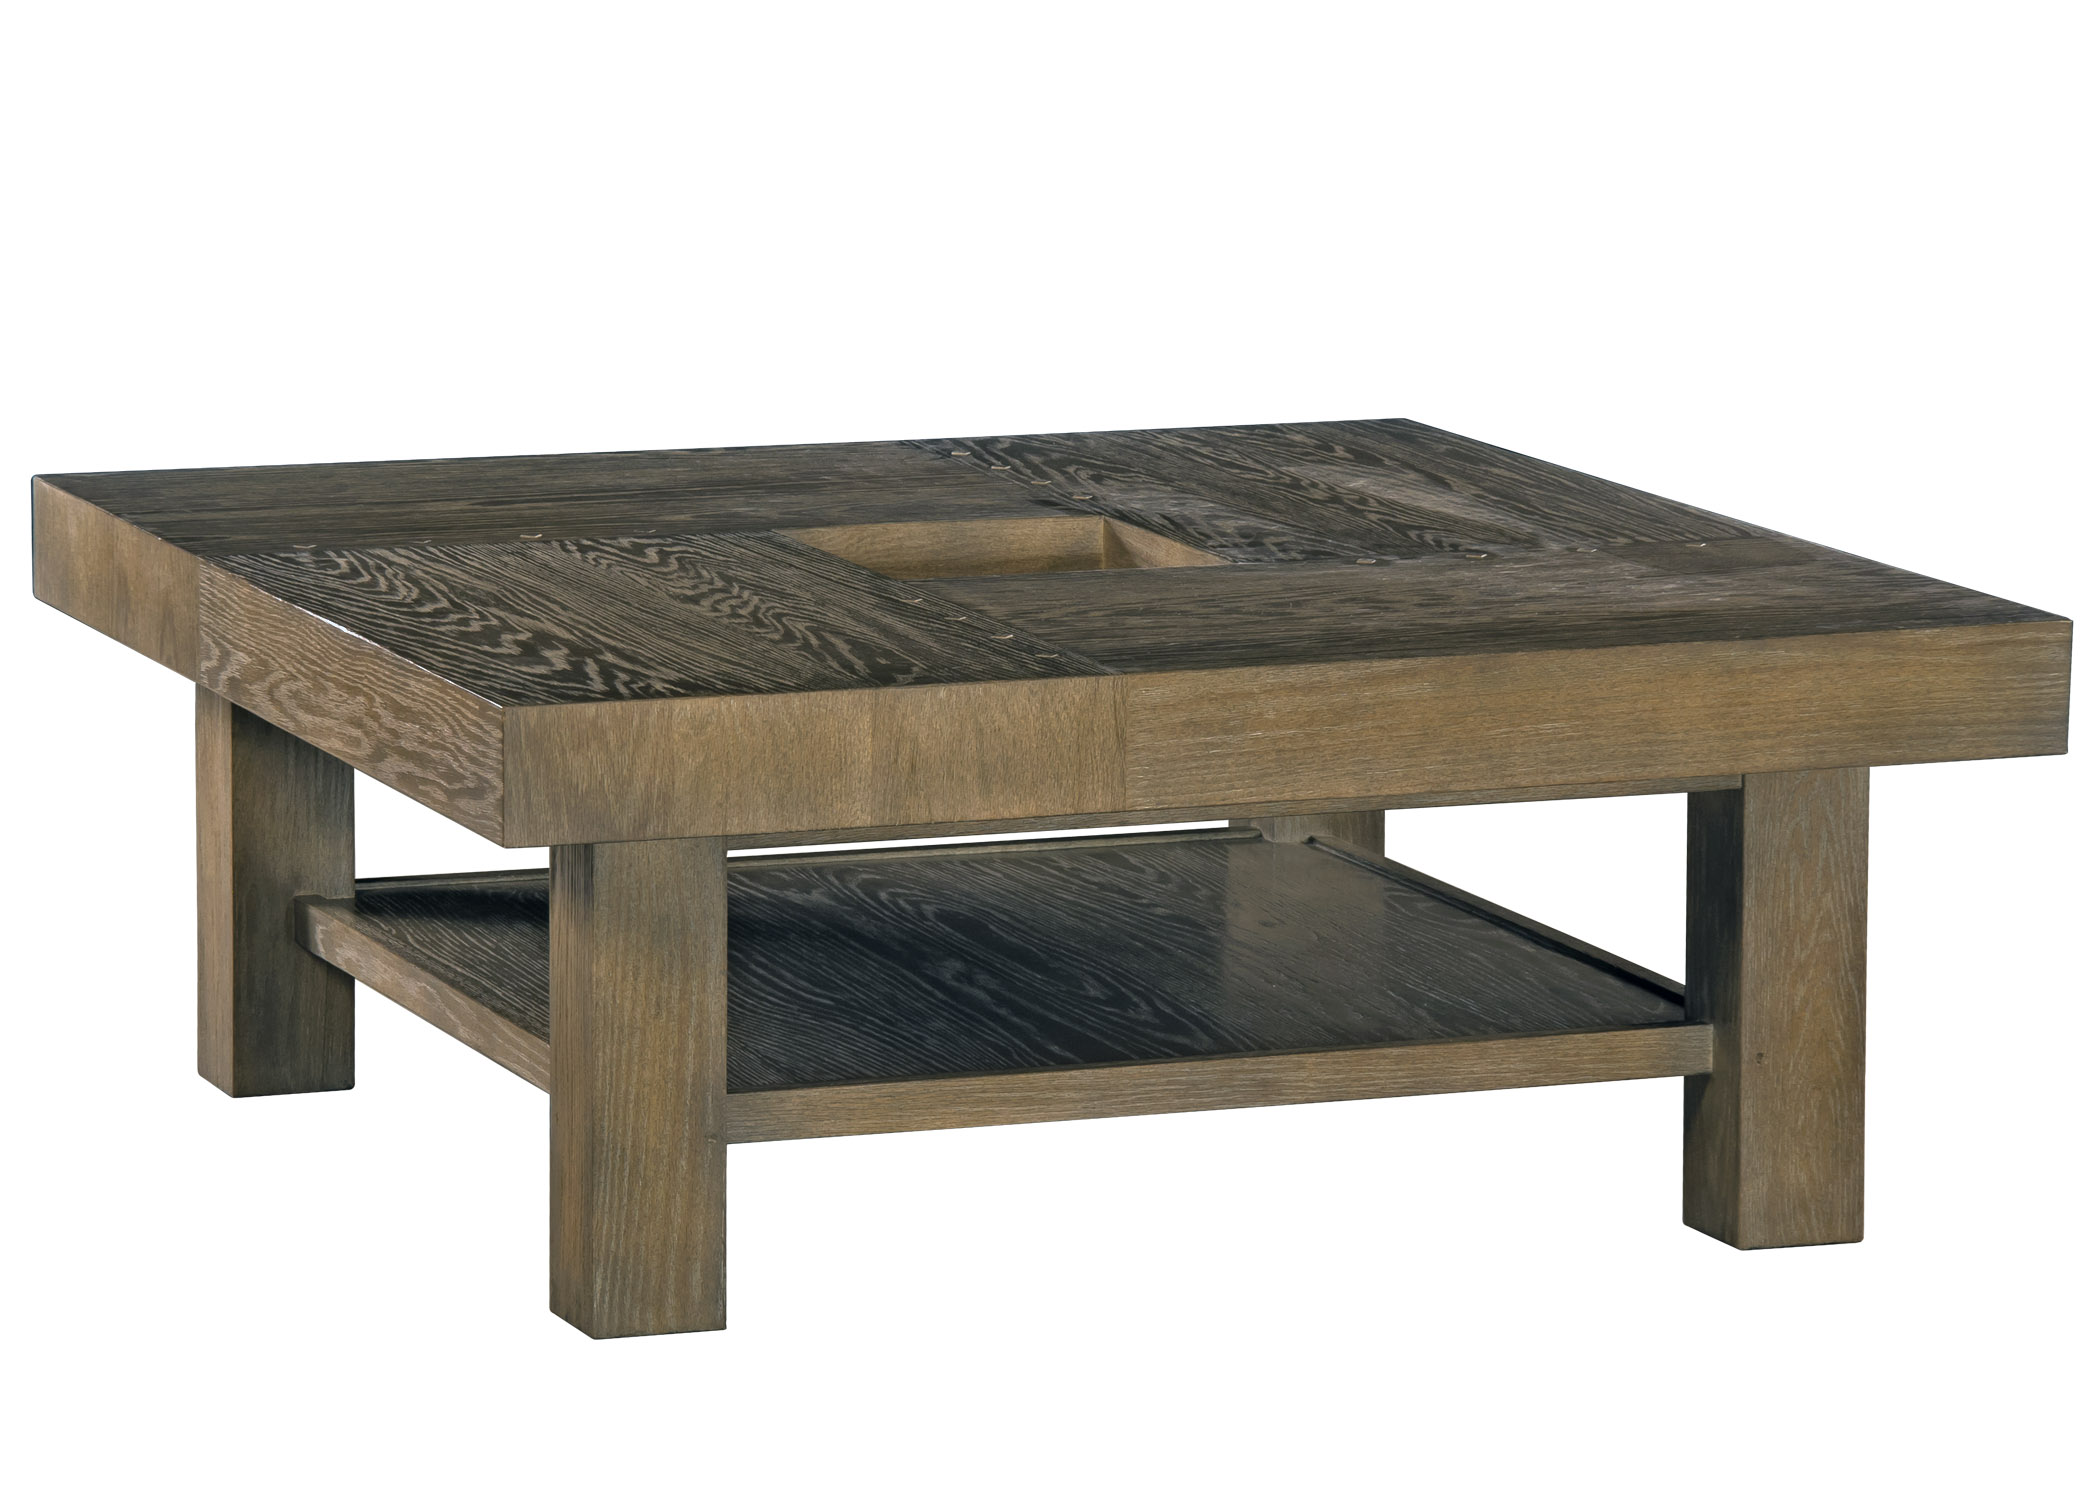 Vail contemporary modern rustic cocktail / coffee table by Woodland furniture in Idaho Falls